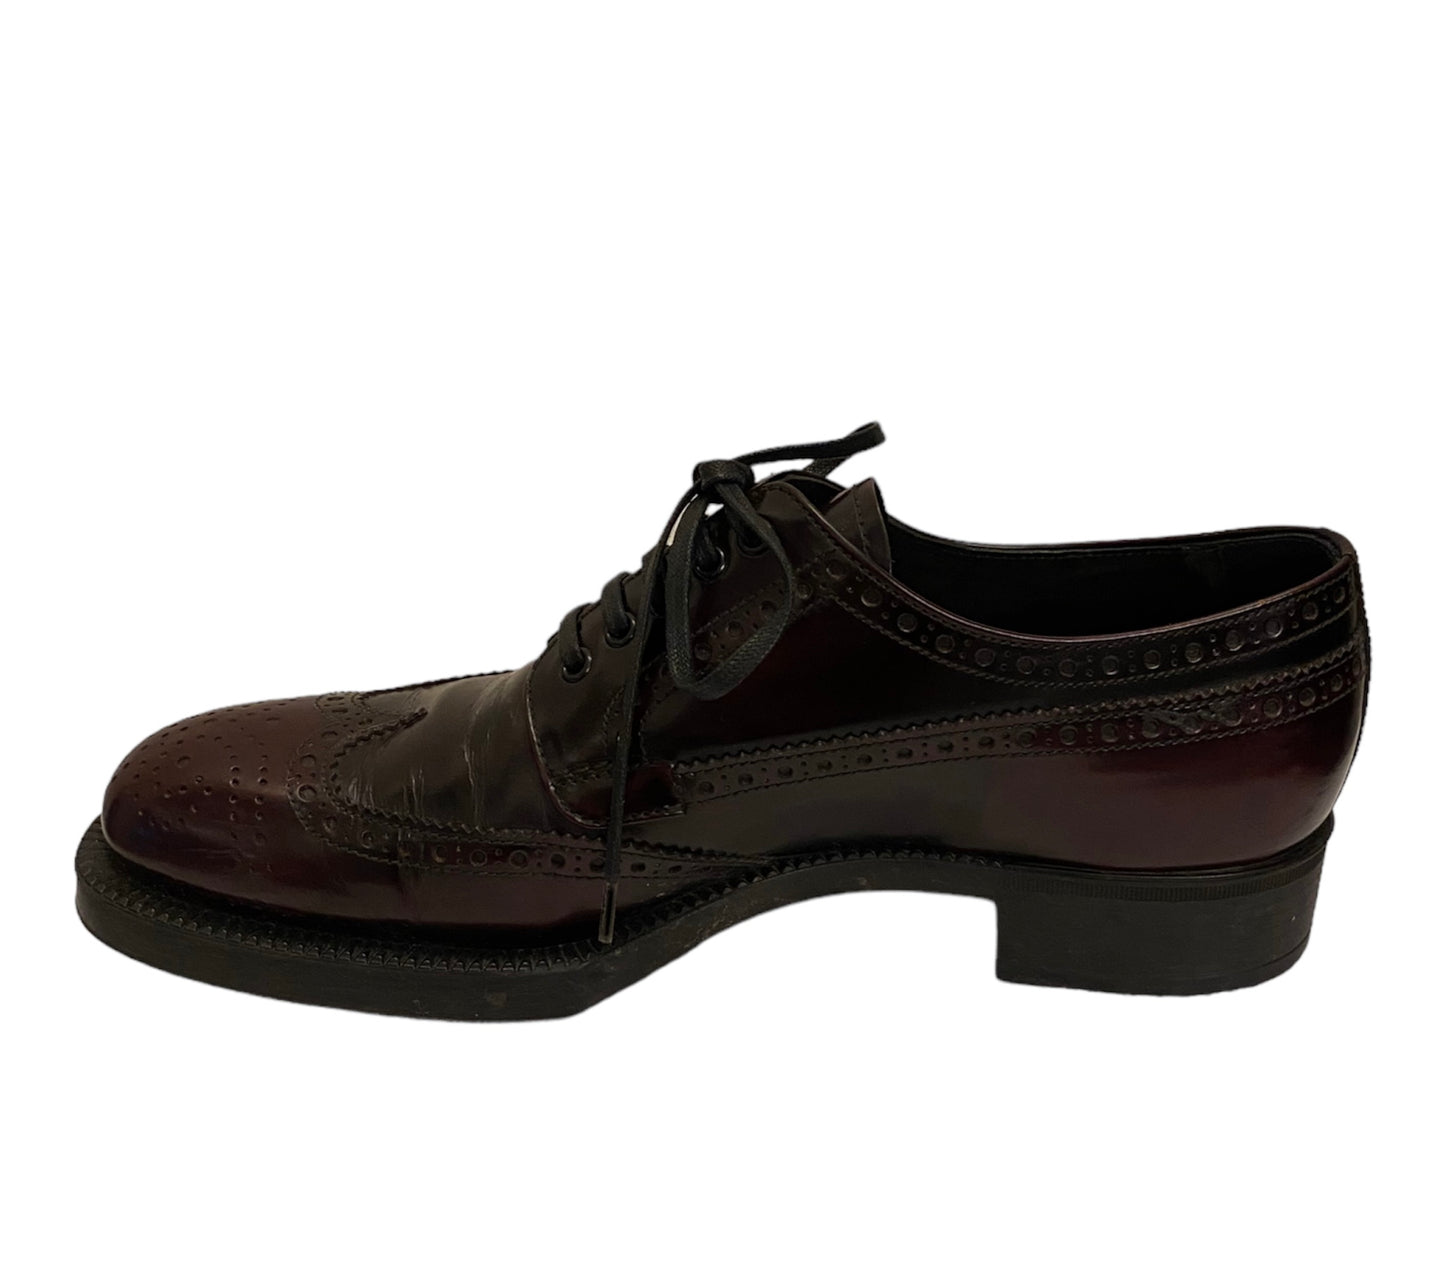 PRADA Leather Lace-up Shoes Size 37